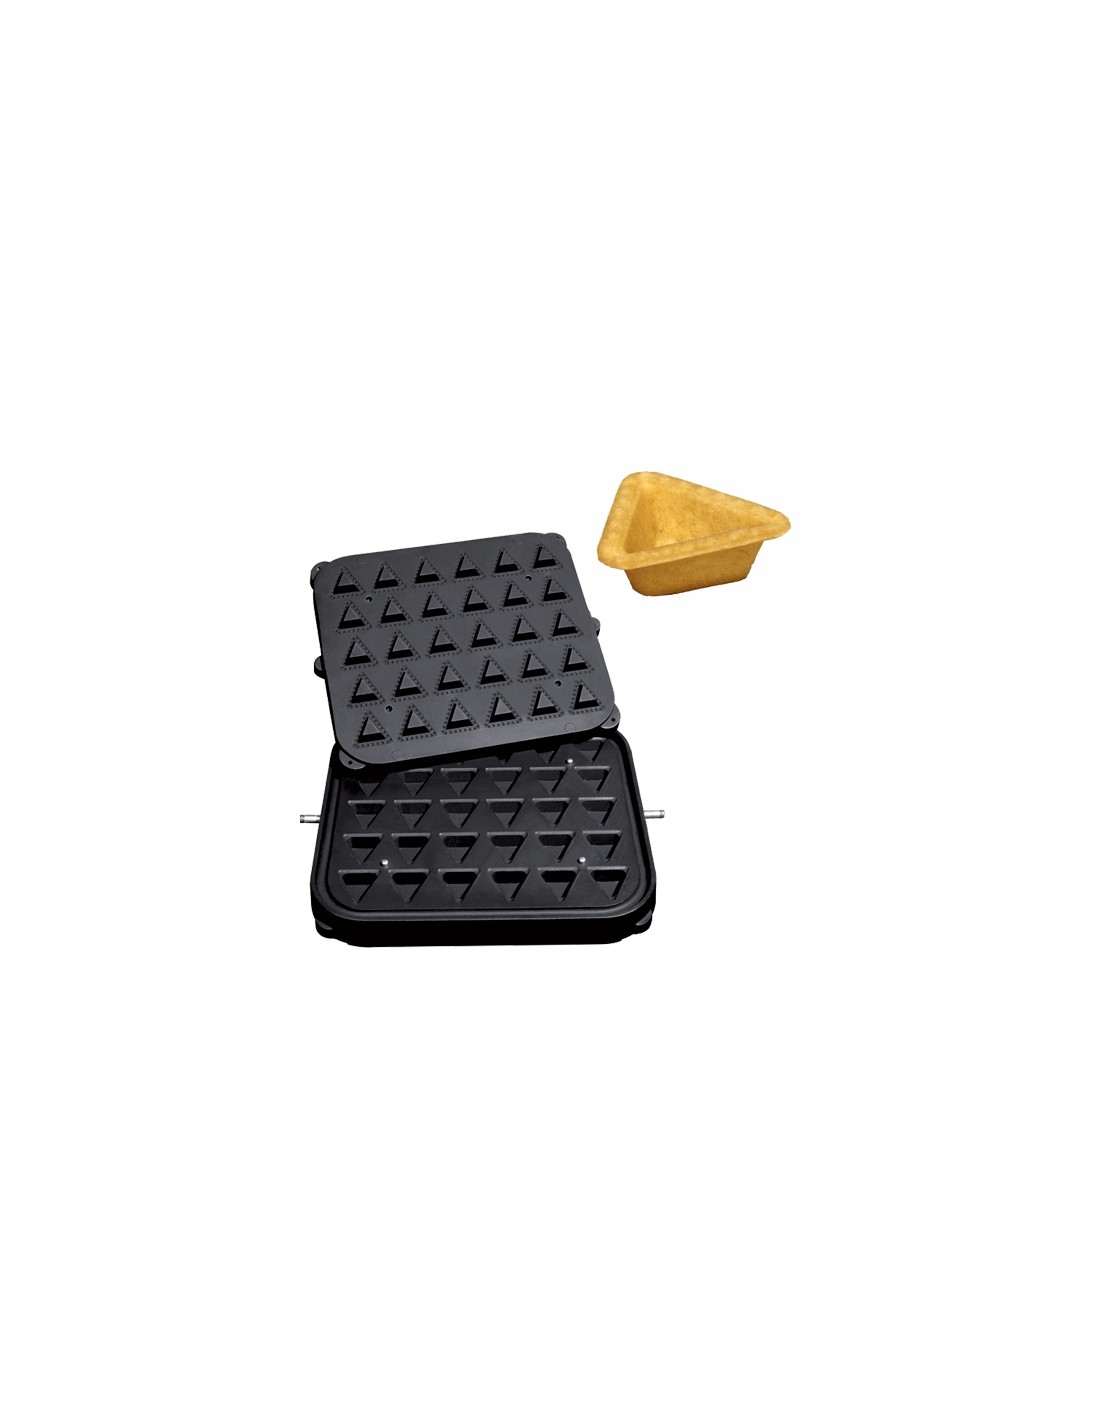 Triangle slotted plate - mm sup 51 x 51 x49 inf 32 x 32 x 29 - h 18 - side 4 - bottom 4 - Impronte 30